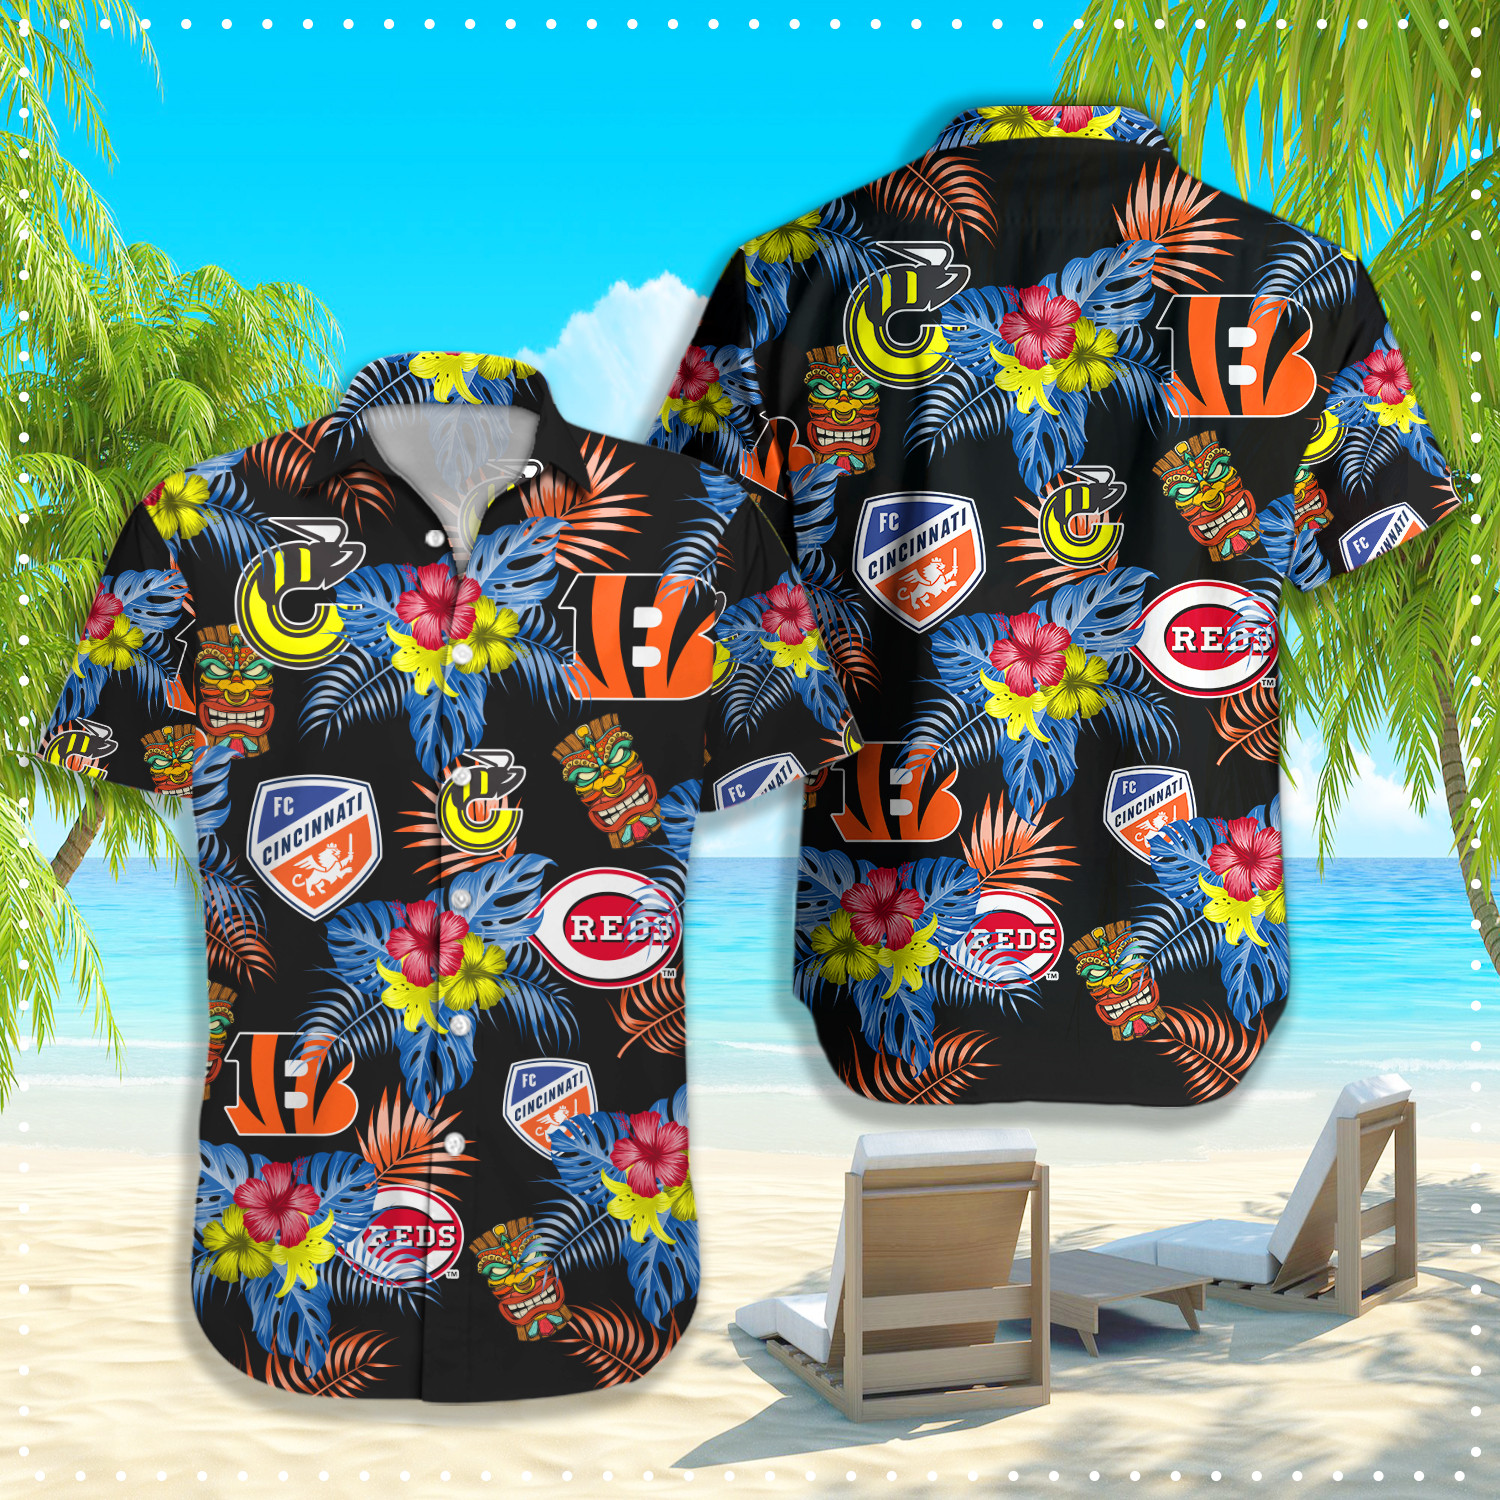 If you're looking for a NHL Hawaiian shirt to wear, don't wait until the last minute! 198